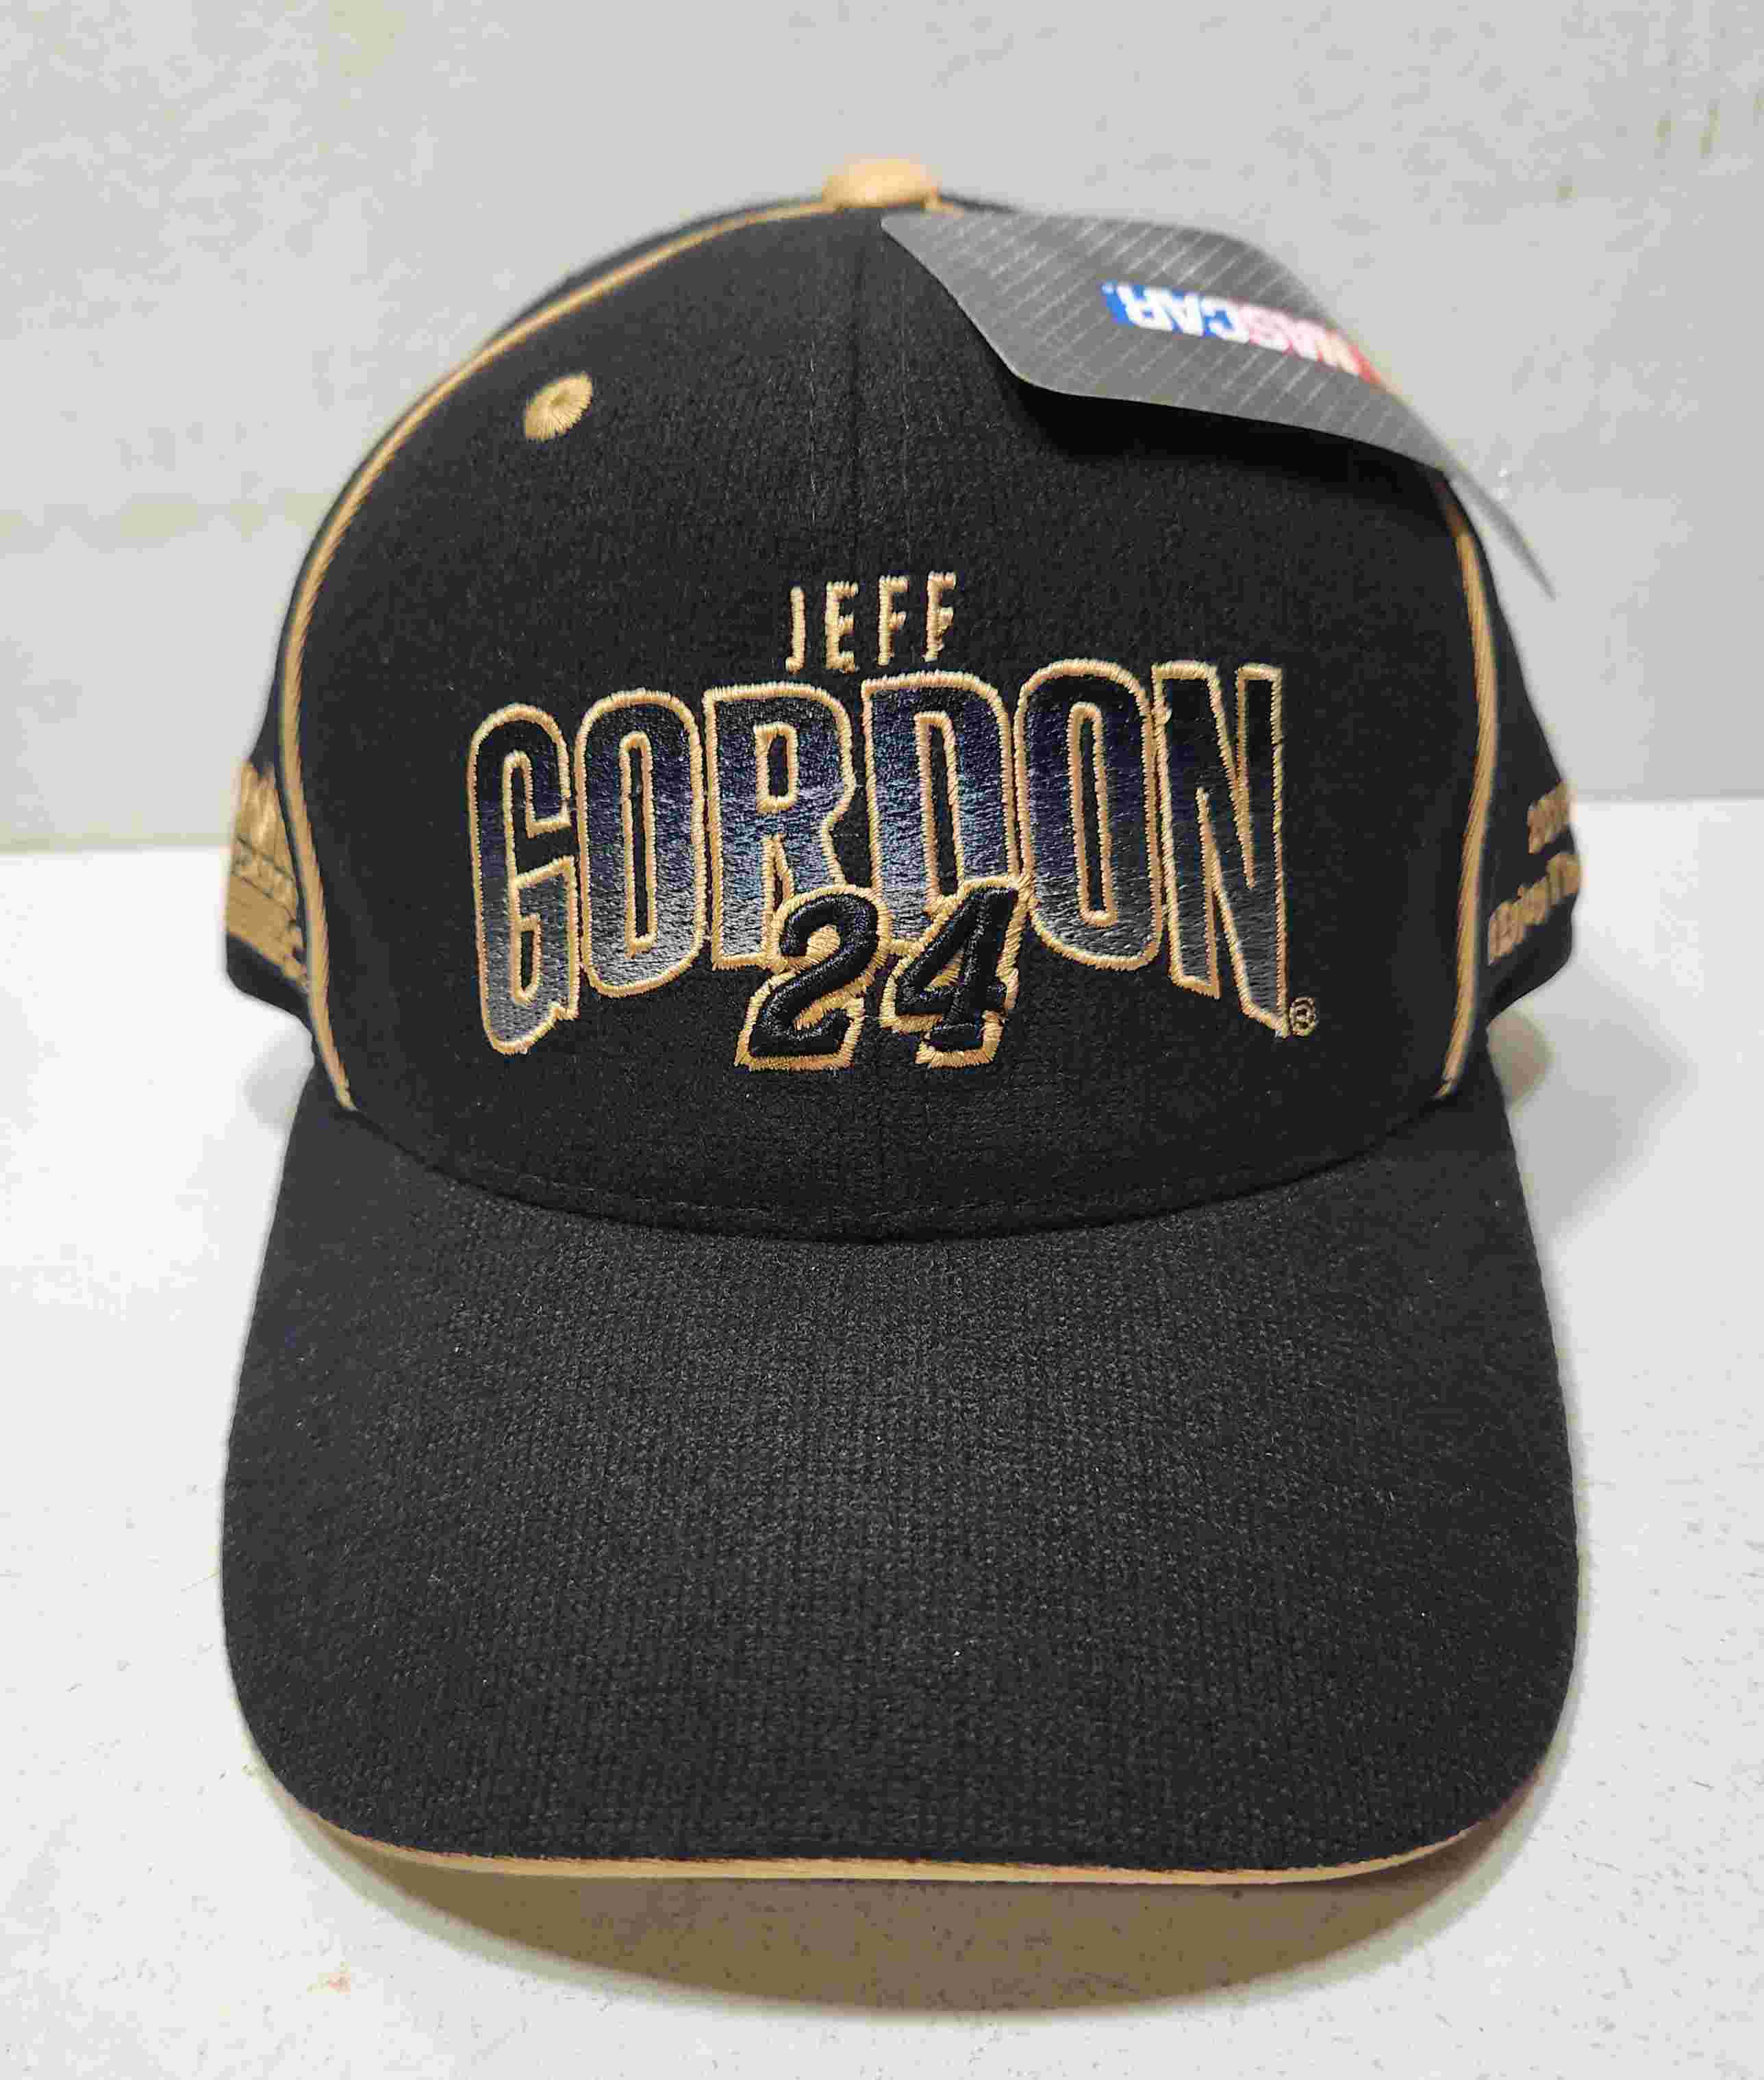 2015 Jeff Gordon "Foundation Of A Champion" collectible hat with pin